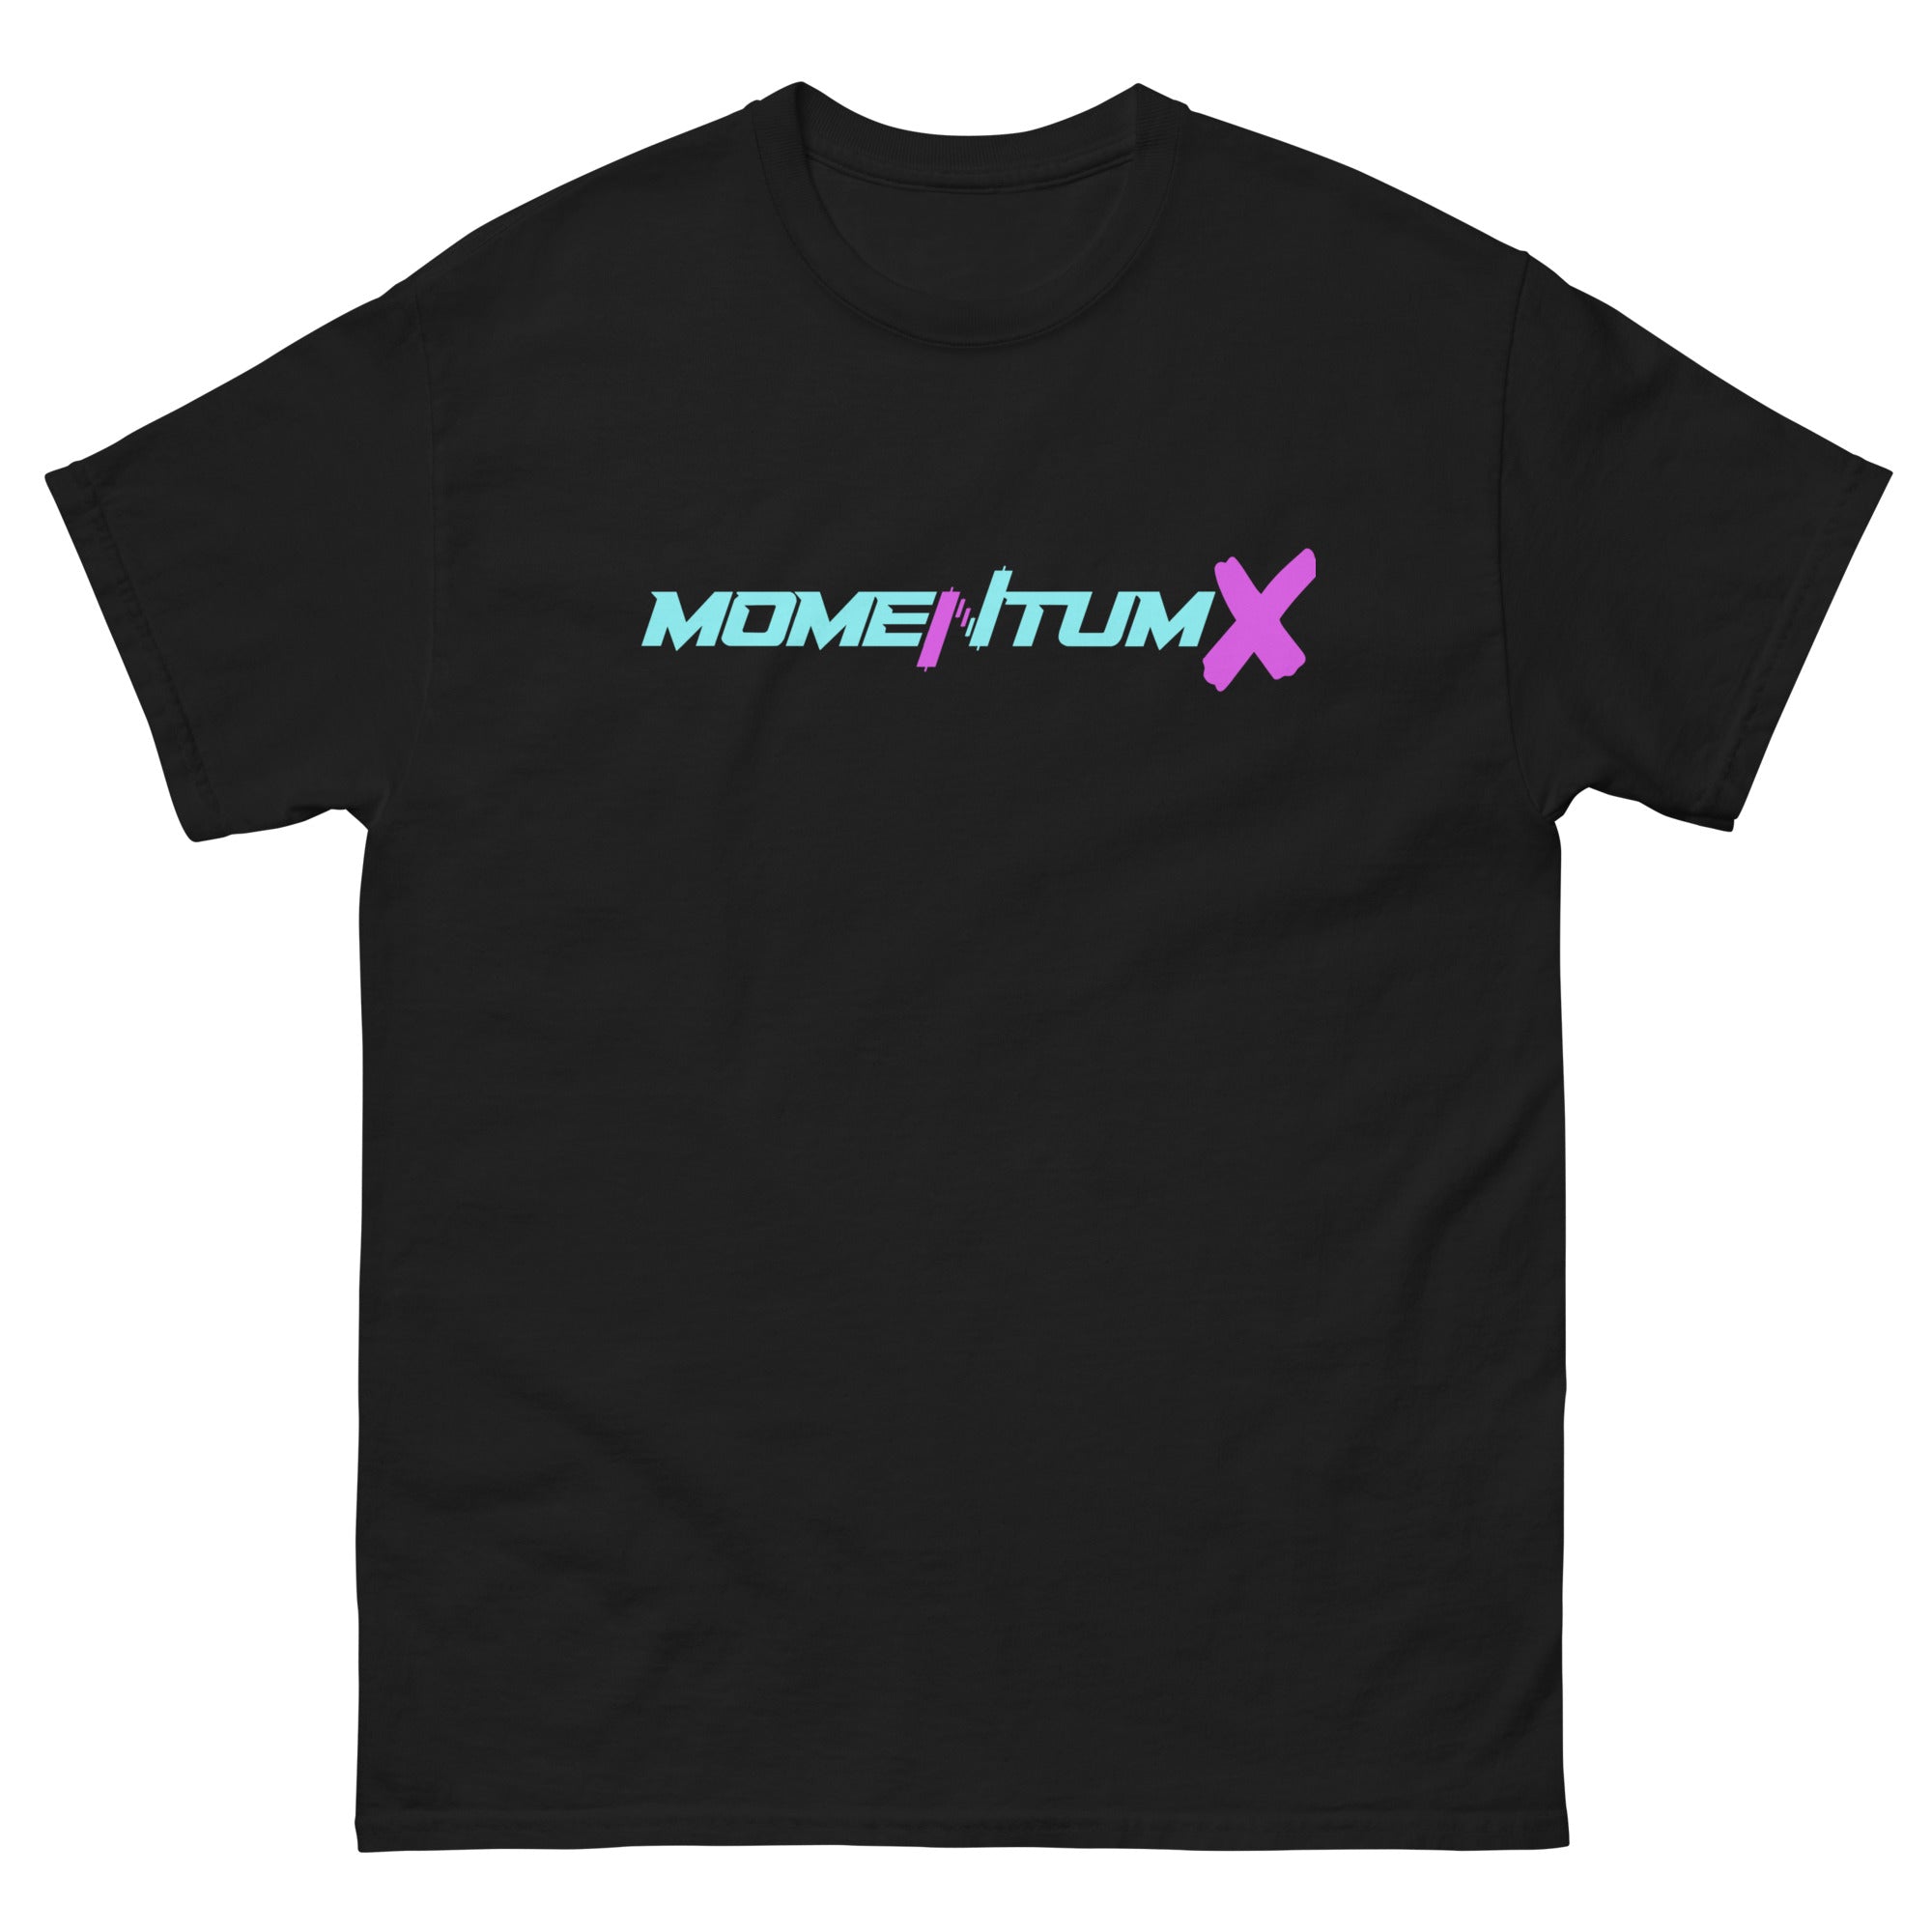 Limited Edition Momentum X classic tee